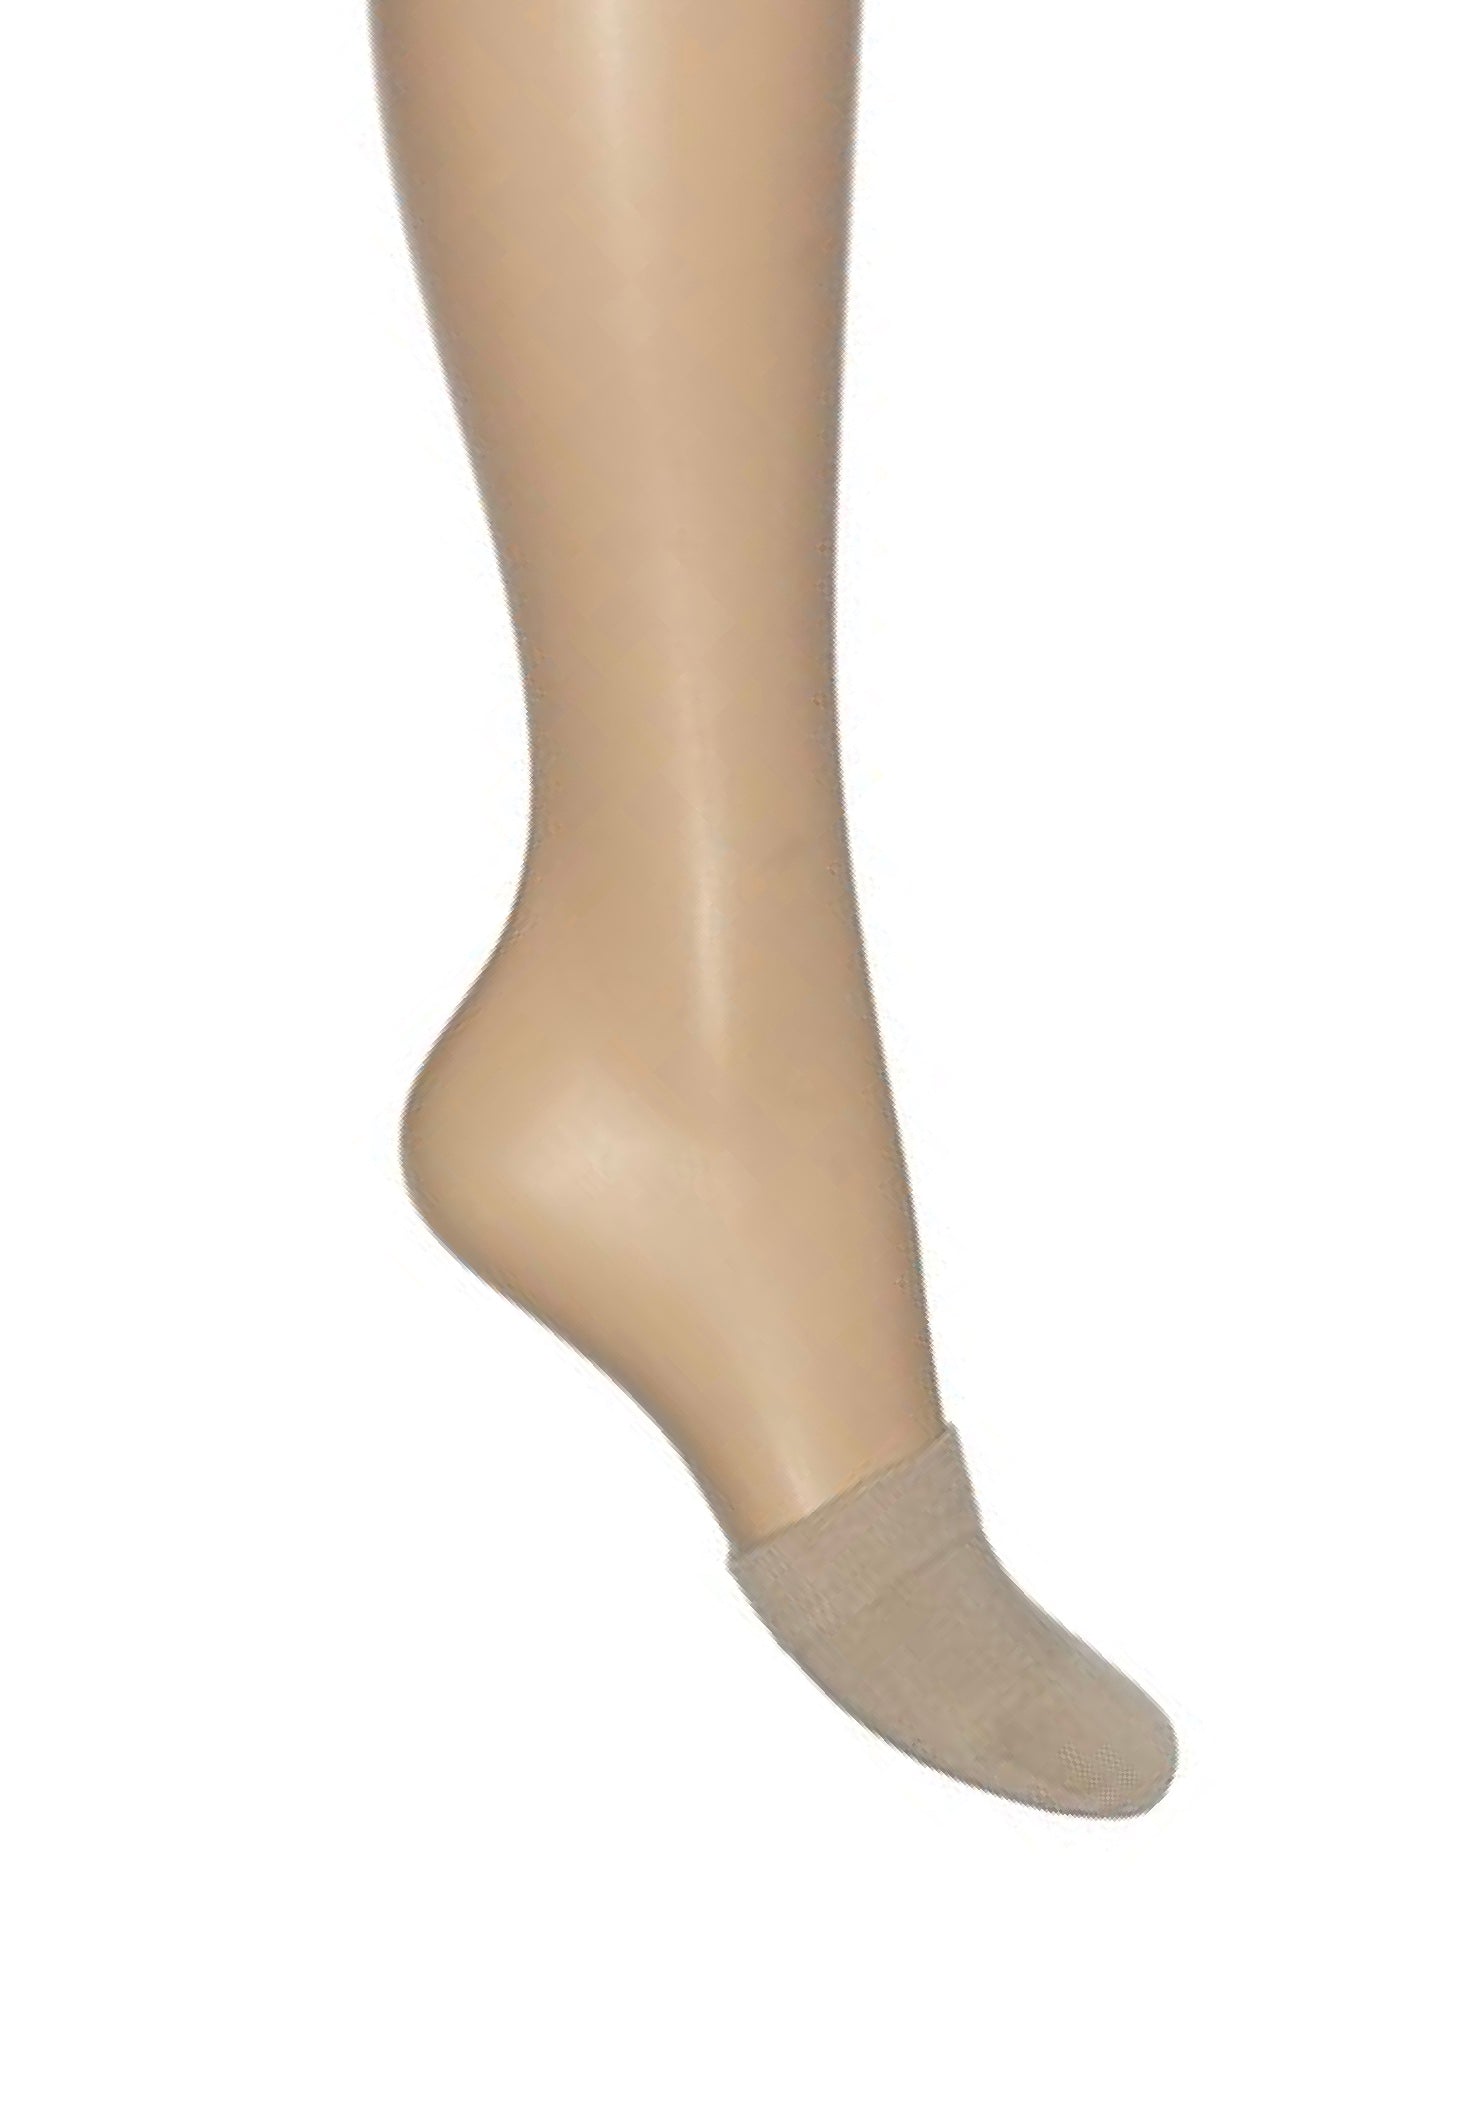 Bonnie Doon Toe Cover BE311000 - beige cotton toe sock perfect for wearing with mules or sling back shoes